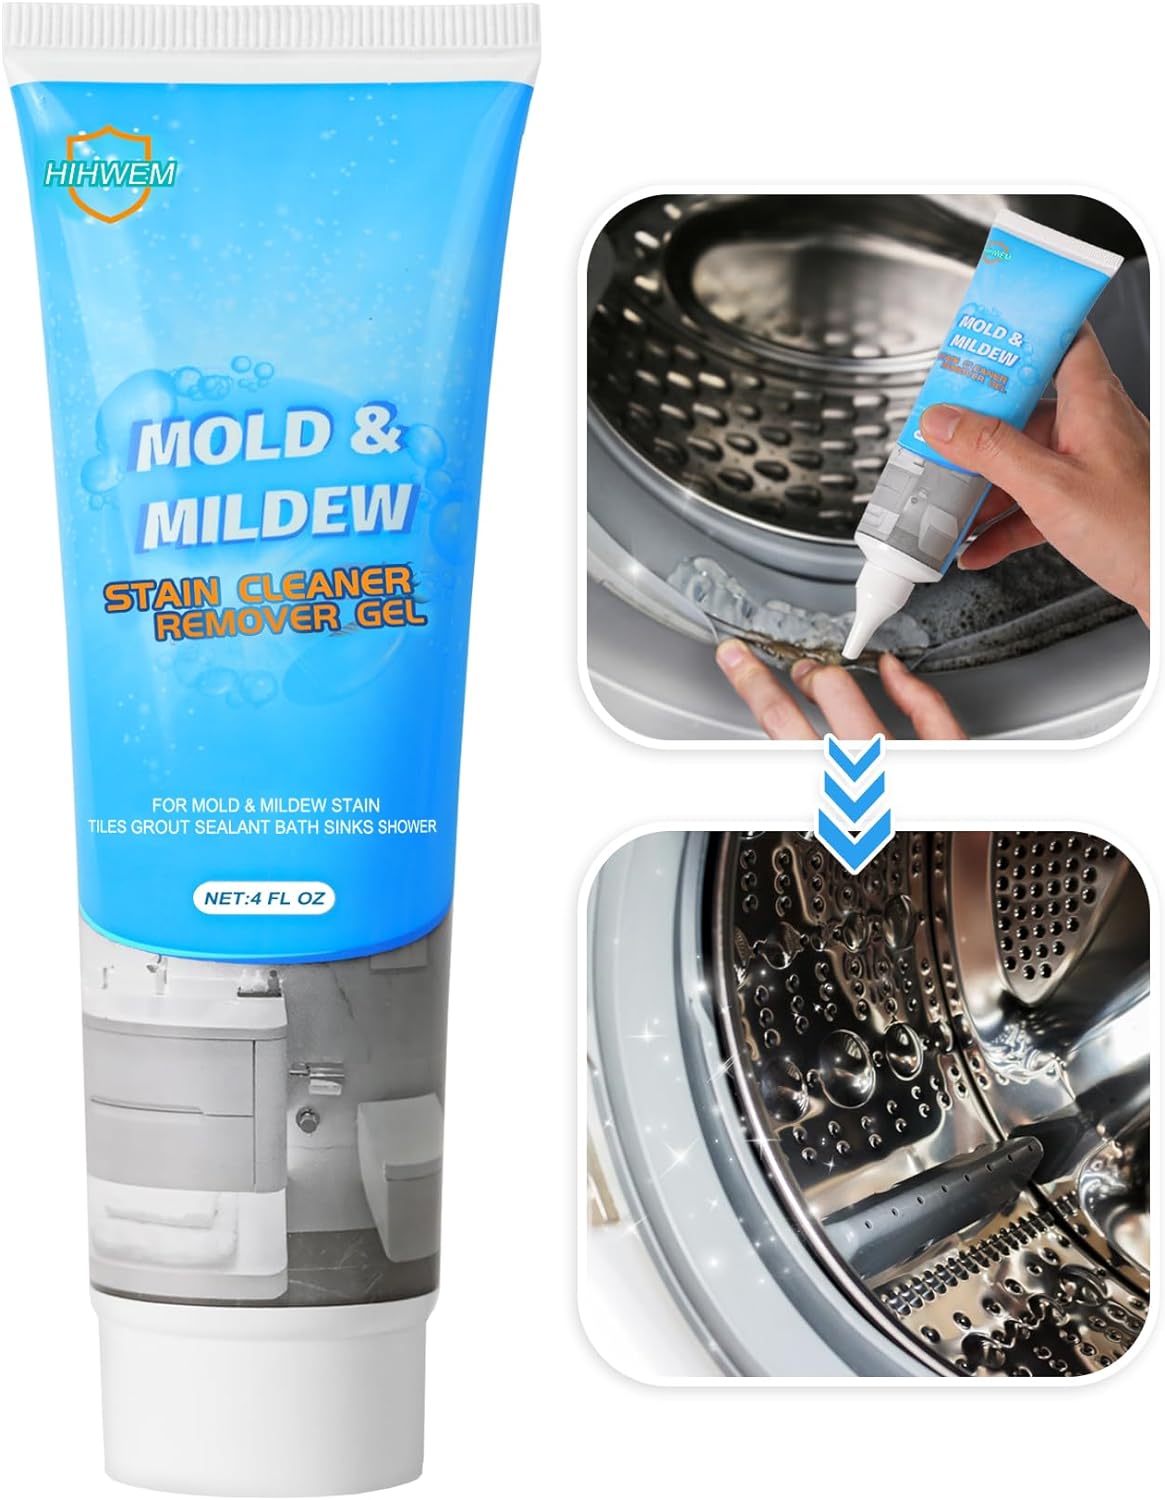 I bought this product to deal with what I thought might be a tough problem - mold growing on unglazed limestone tile in a shower enclosure. I was concerned about whether a product would stay where I put it on a vertical wall, or bleach the limestone, or stink, or simply not remove the mold. Well, this product alleviated all of those concerns. I started with a patch of mold on a relatively inconspicuous tile and it worked great (see photos). I then bought more and used it on all the moldy tiles. 